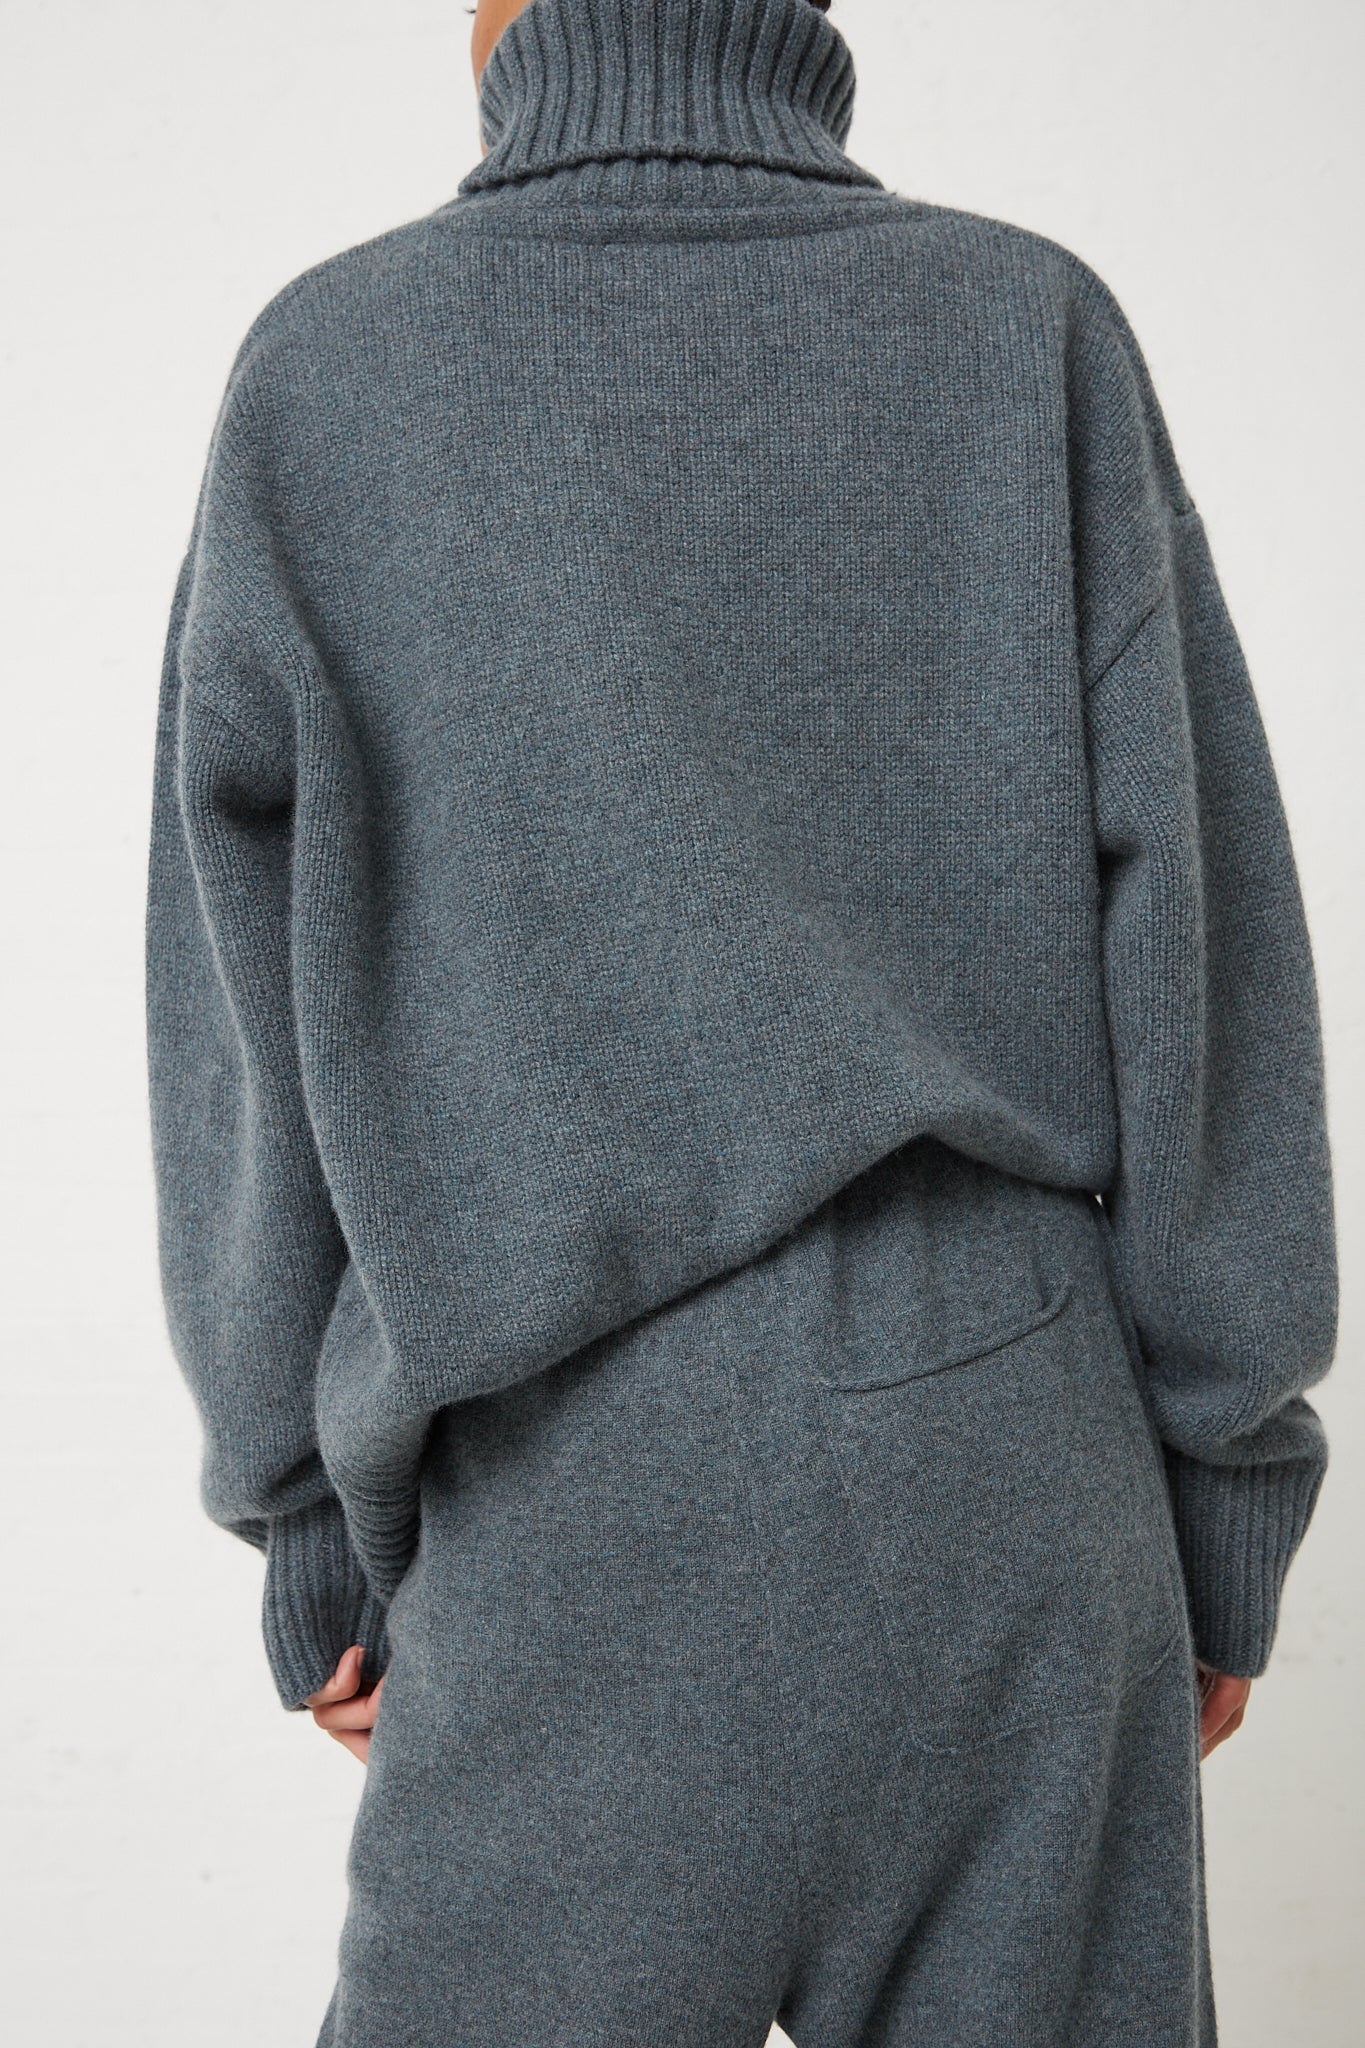 The back view of a woman wearing a grey turtleneck sweater and Extreme Cashmere's No. 320 Rush Trouser in Wave with drawstring waist.